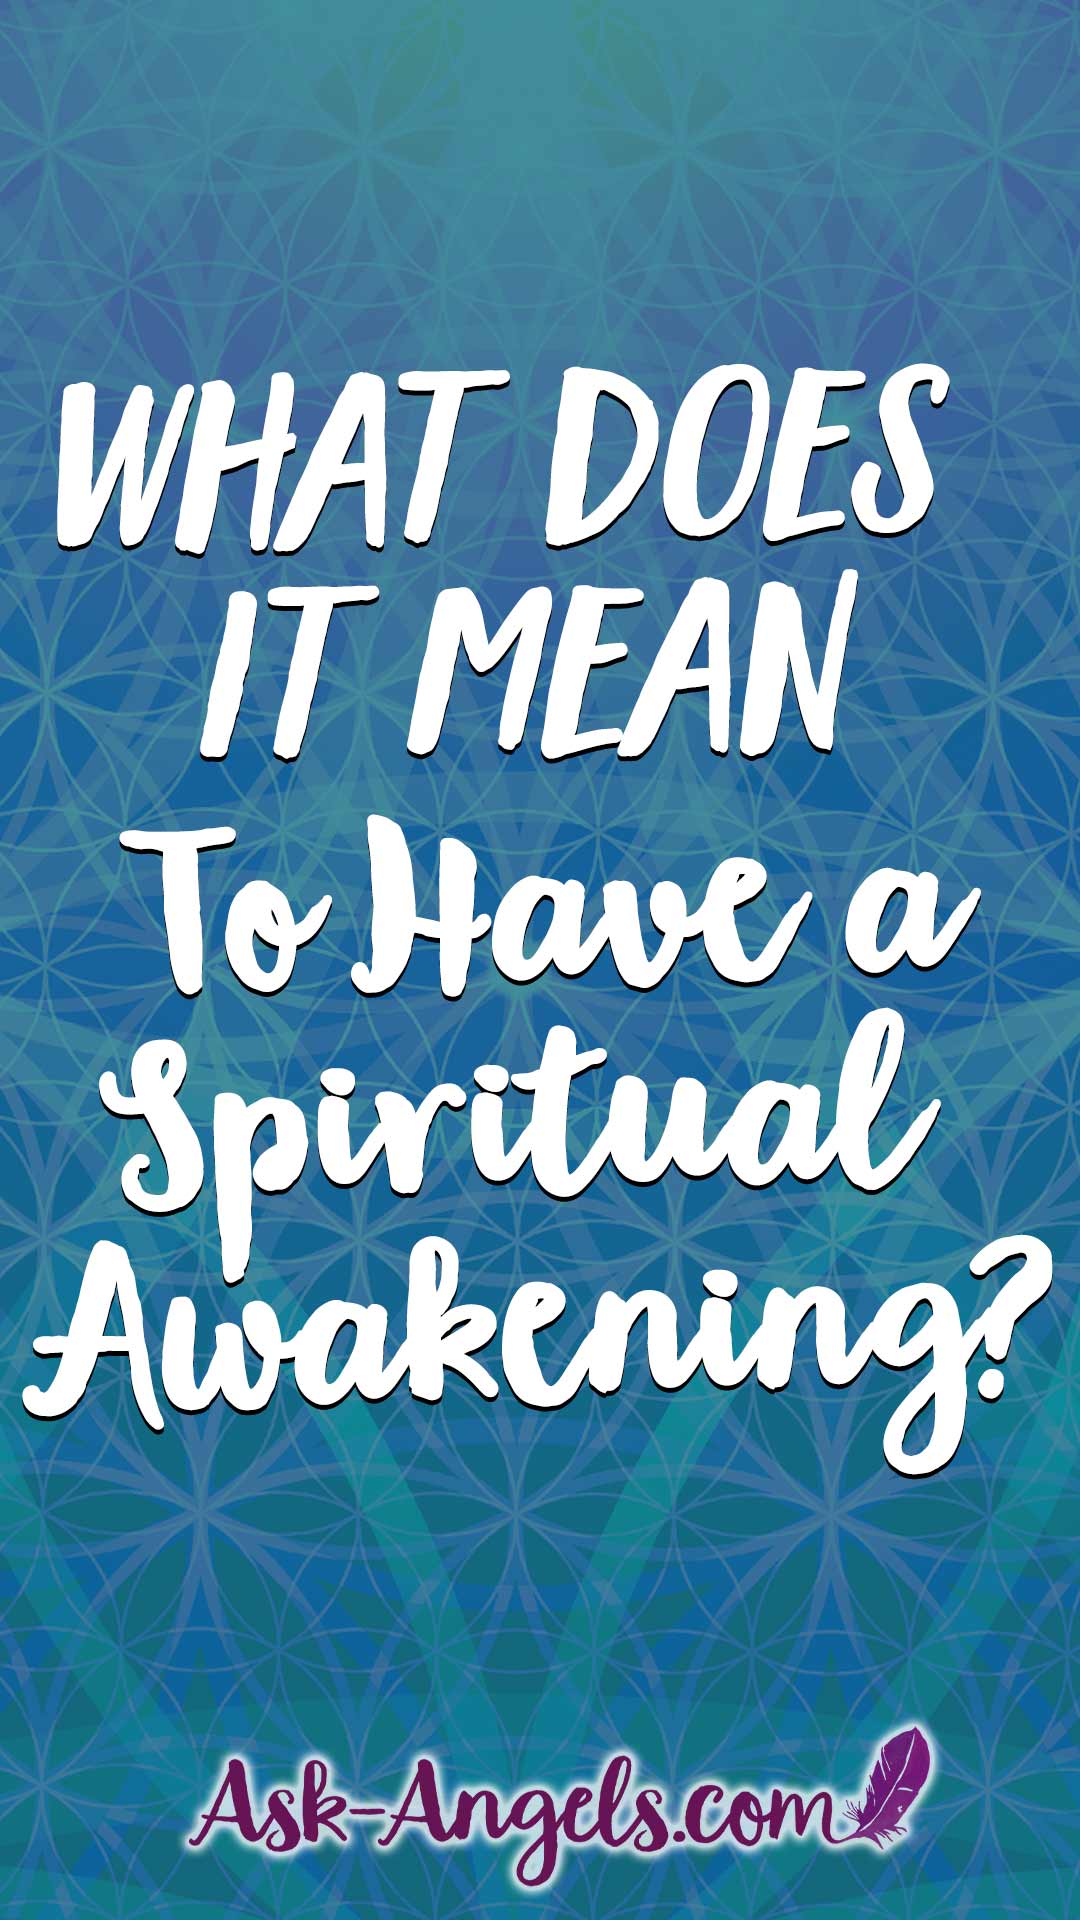 What Does It Mean to Have a Spiritual Awakening... And are you having one?